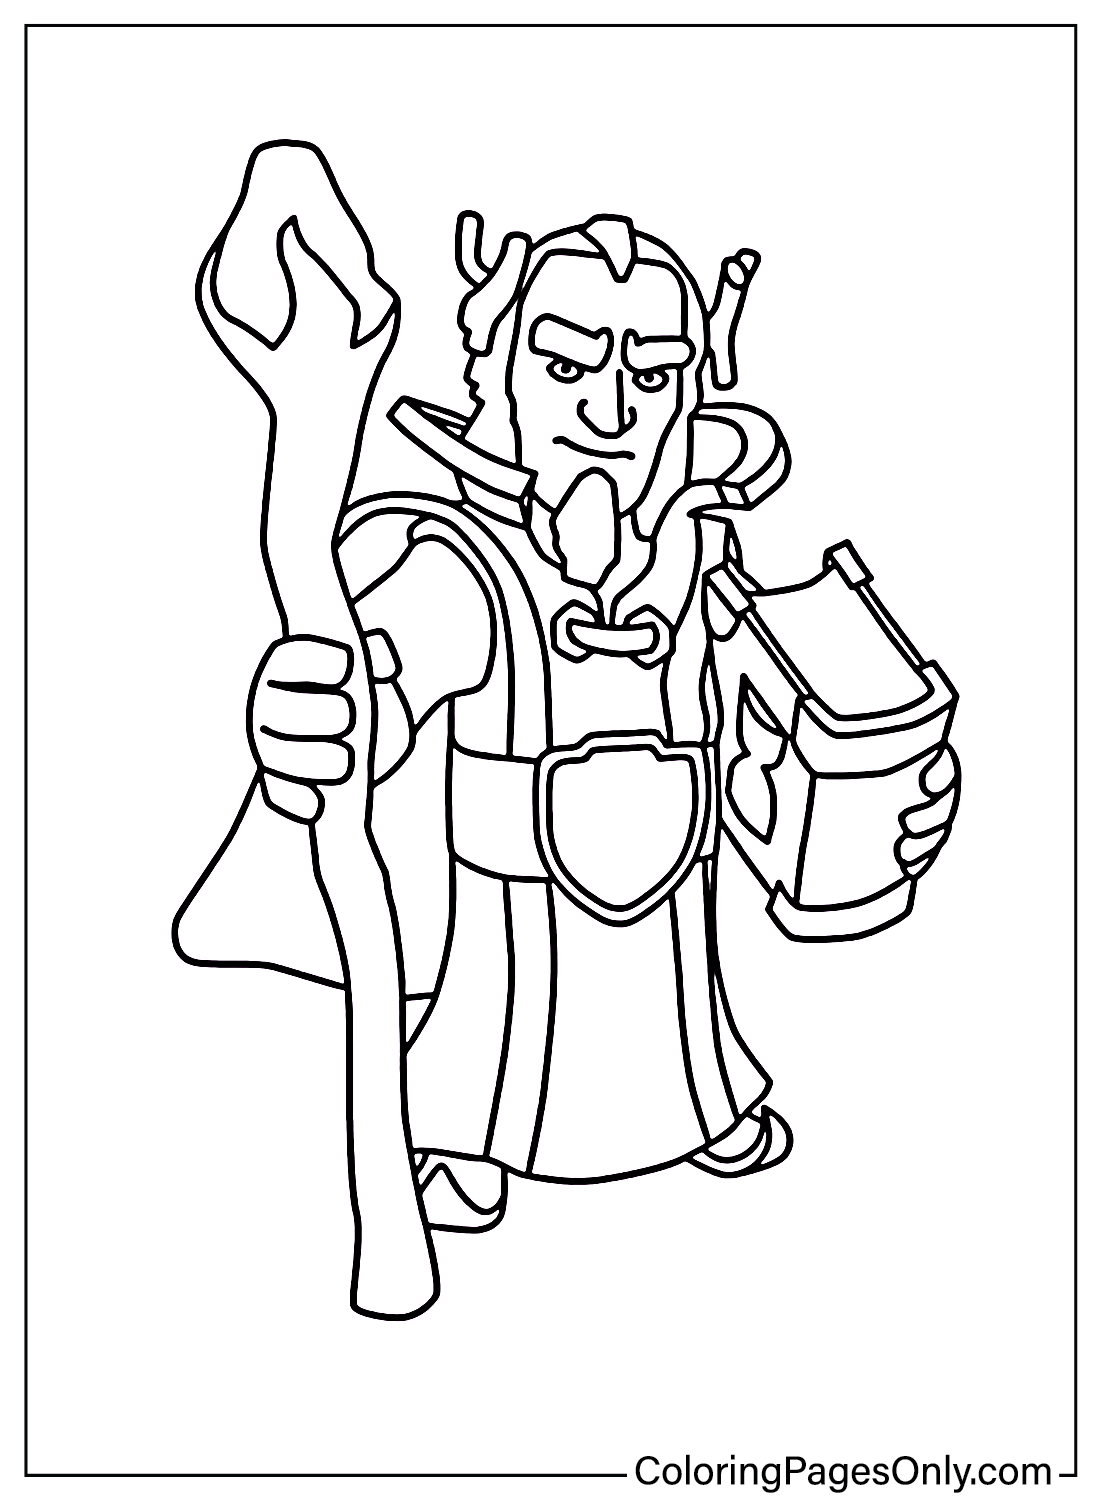 Clash of Clans Grand Warden Coloring Pages from Clash of Clans